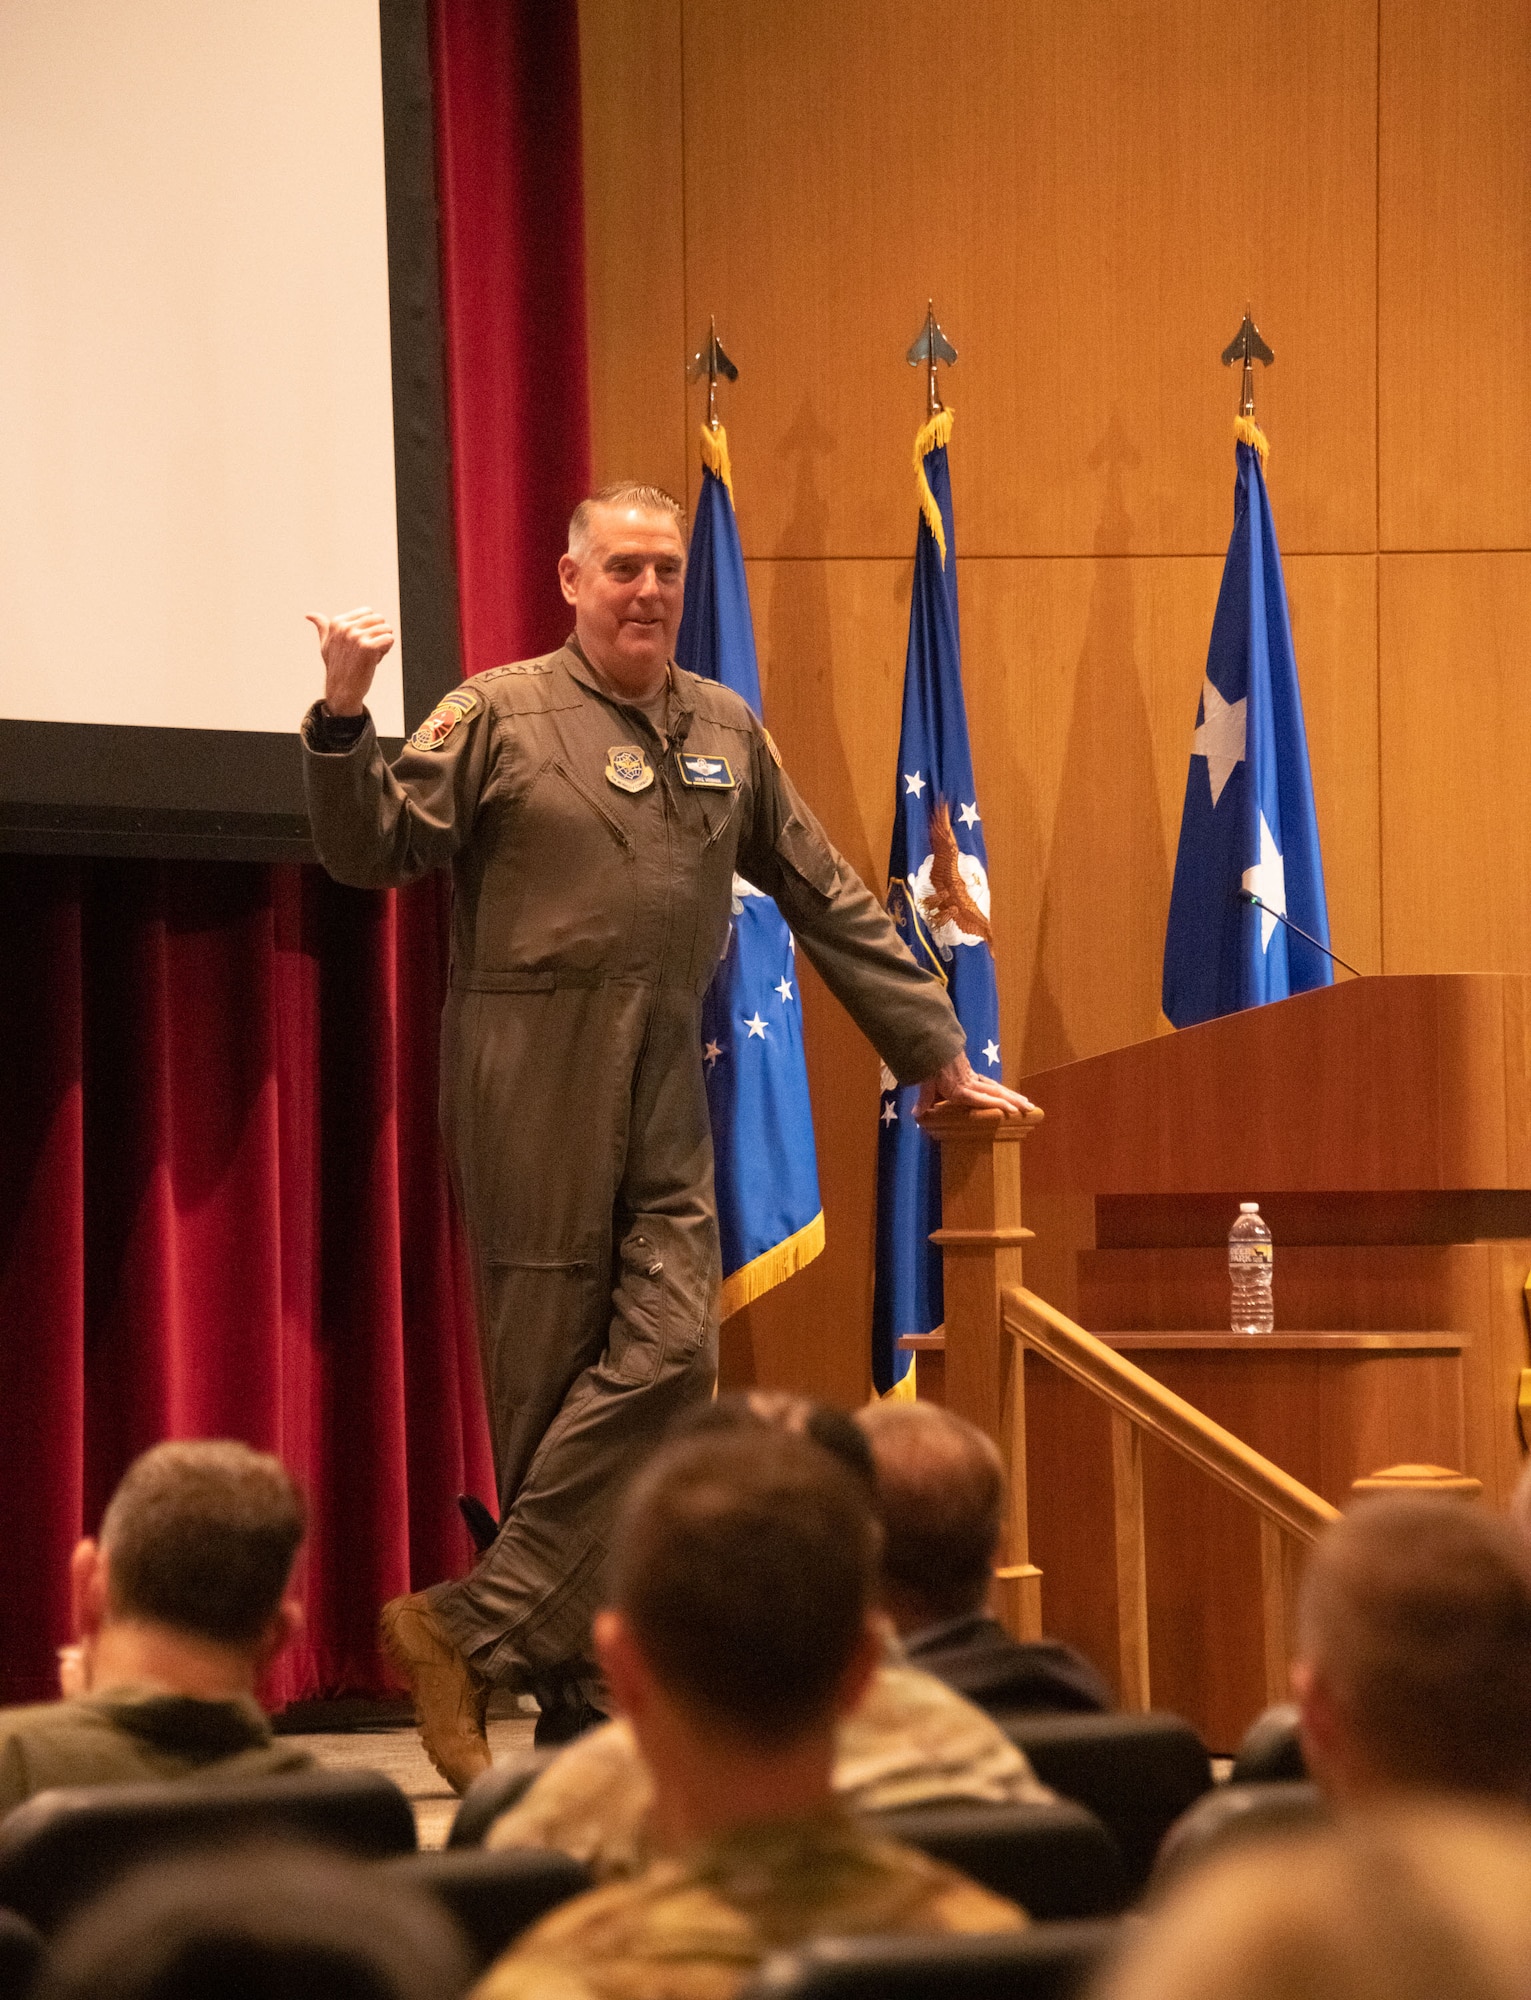 Gen. Mike Minihan is Commander, Air Mobility Command, Scott Air Force Base, Illinois. The command serves as U.S. Transportation Command’s air component, executing the air mobility mission in support of the joint force, allies and partners with a fleet of nearly 1,100 aircraft. Visit Maxwell air-force Base to speak to airmen. U.S. Air Force photo by Darius Hutton )